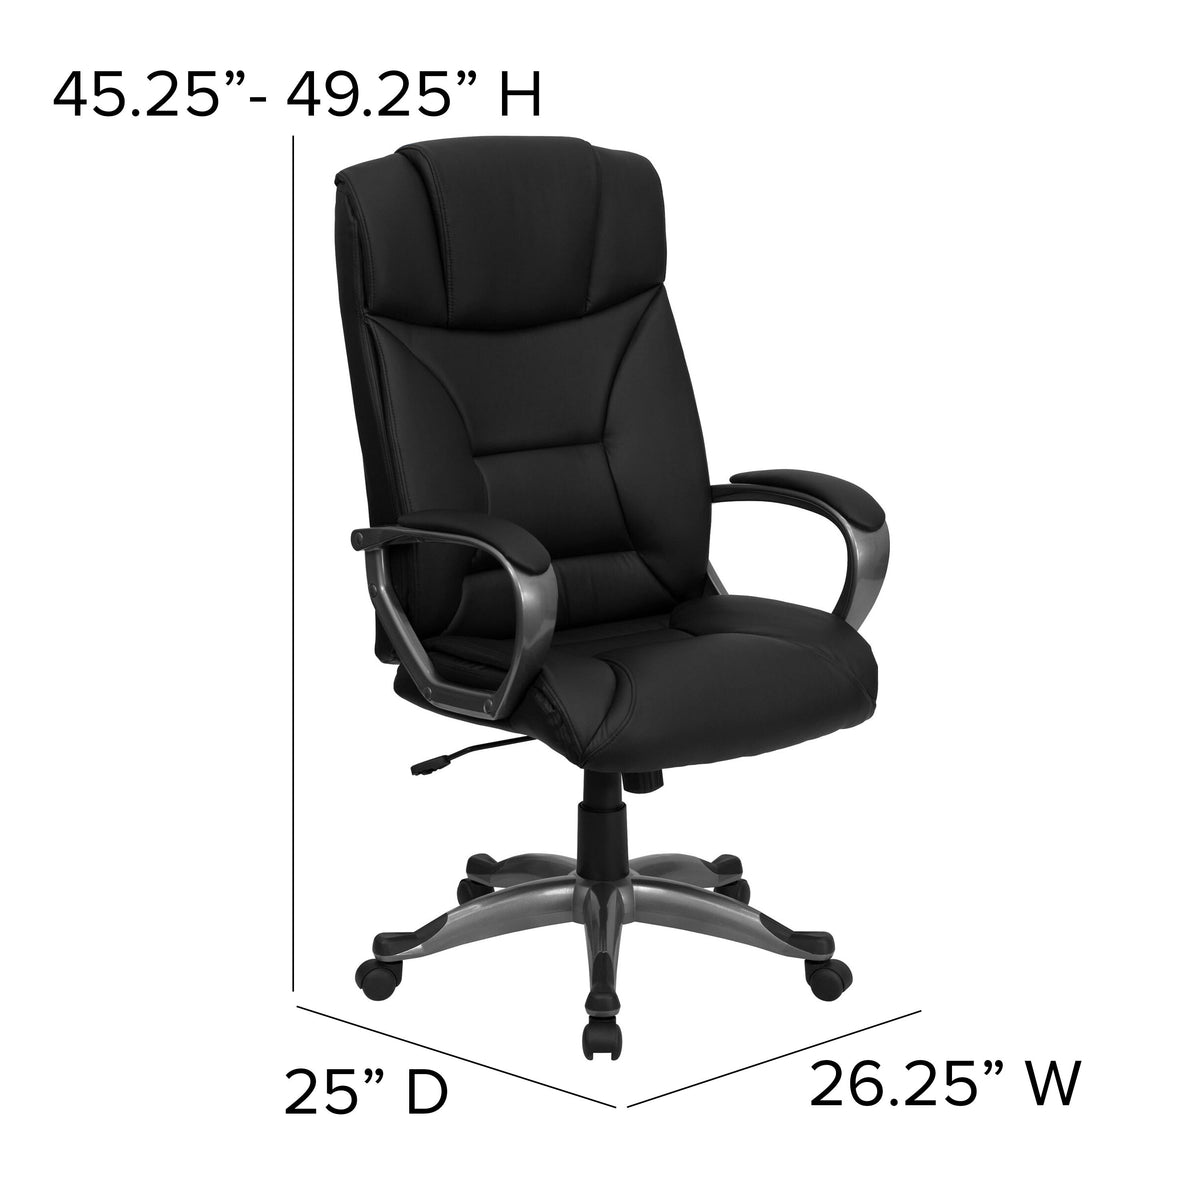 High Back Black LeatherSoft Executive Swivel Office Chair w/Lip Edge Base & Arms